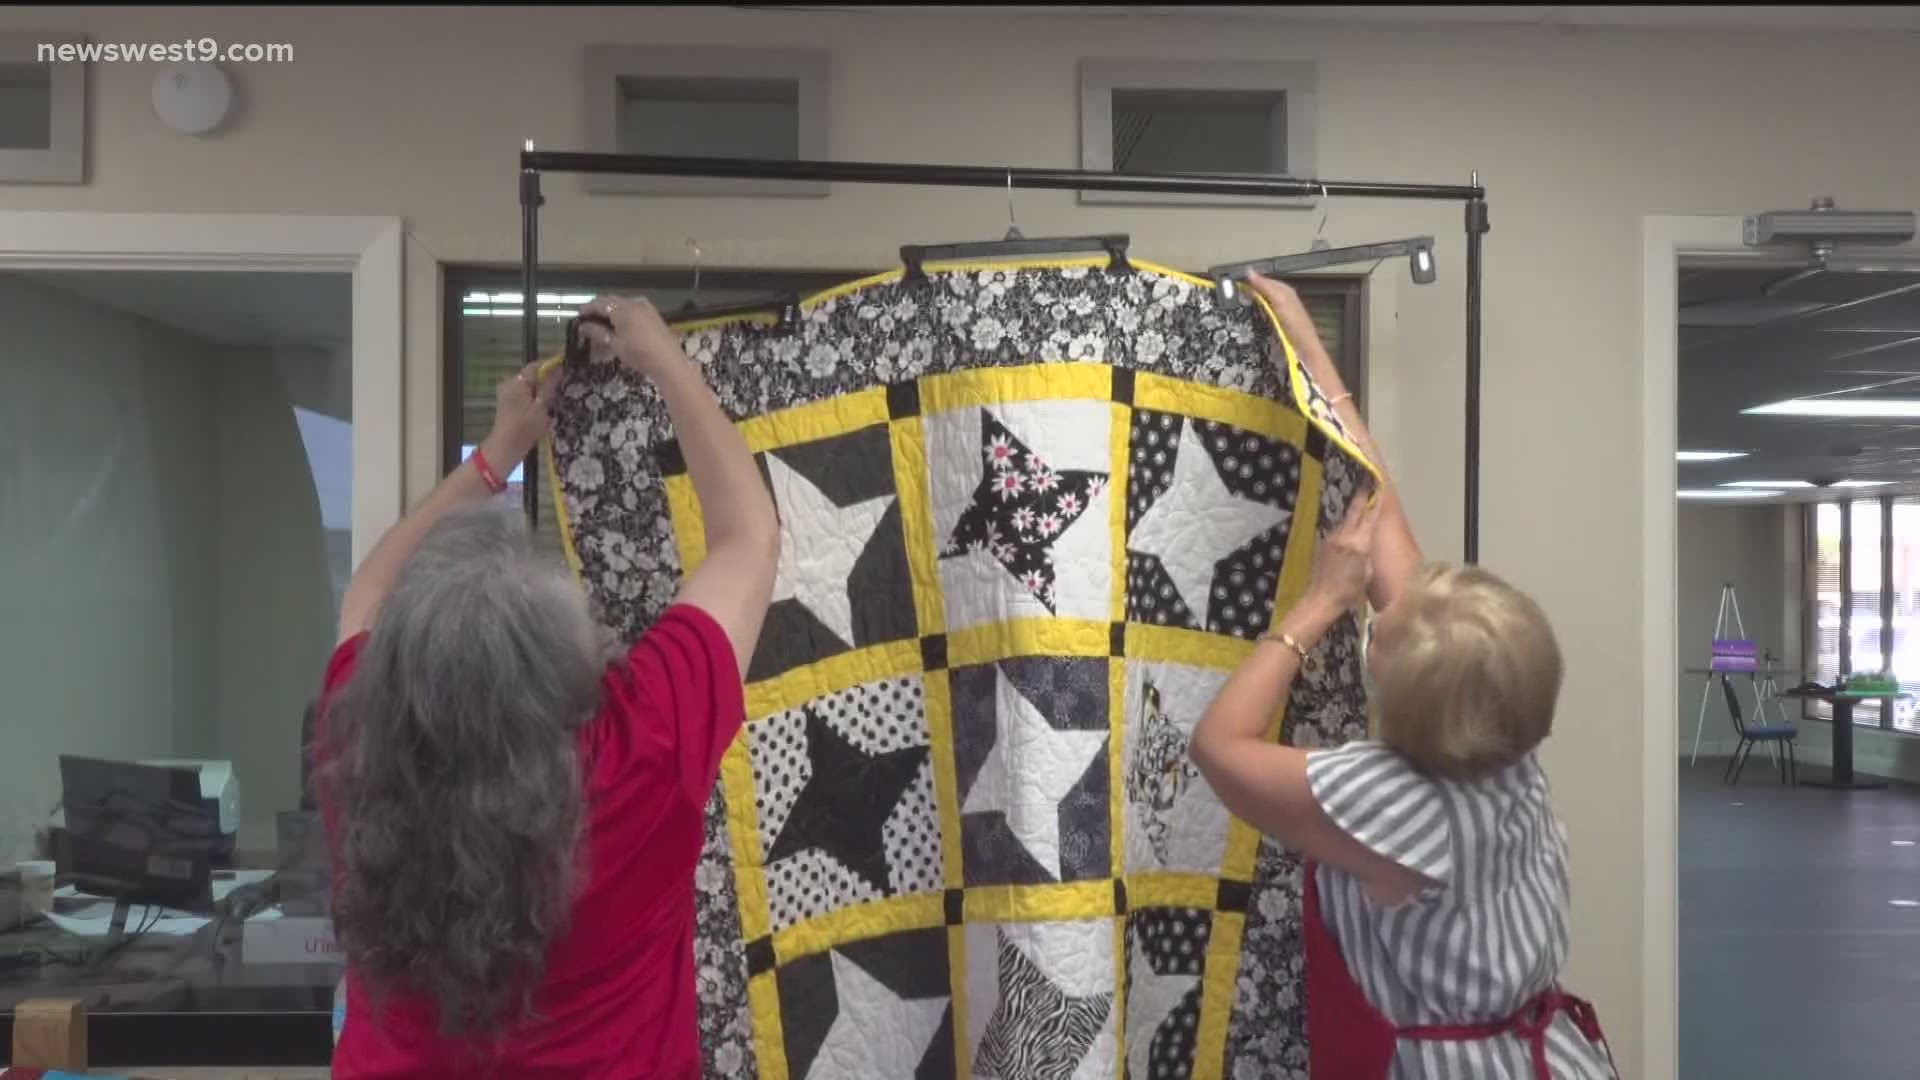 “We were just so concerned and saddened by all that was going on, so we did what we do best...we made quilts."